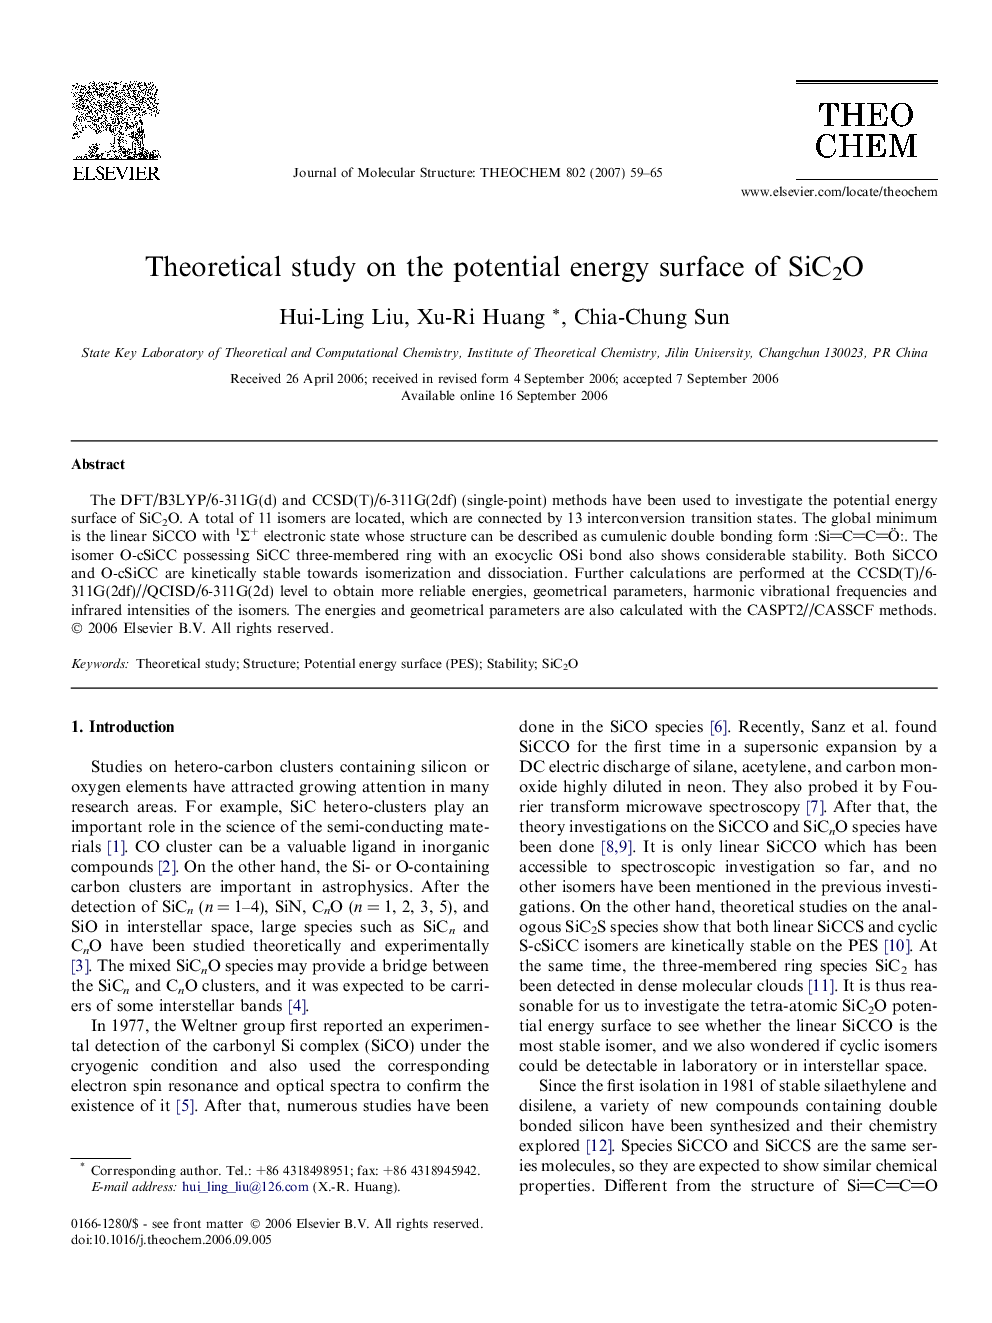 Theoretical study on the potential energy surface of SiC2O